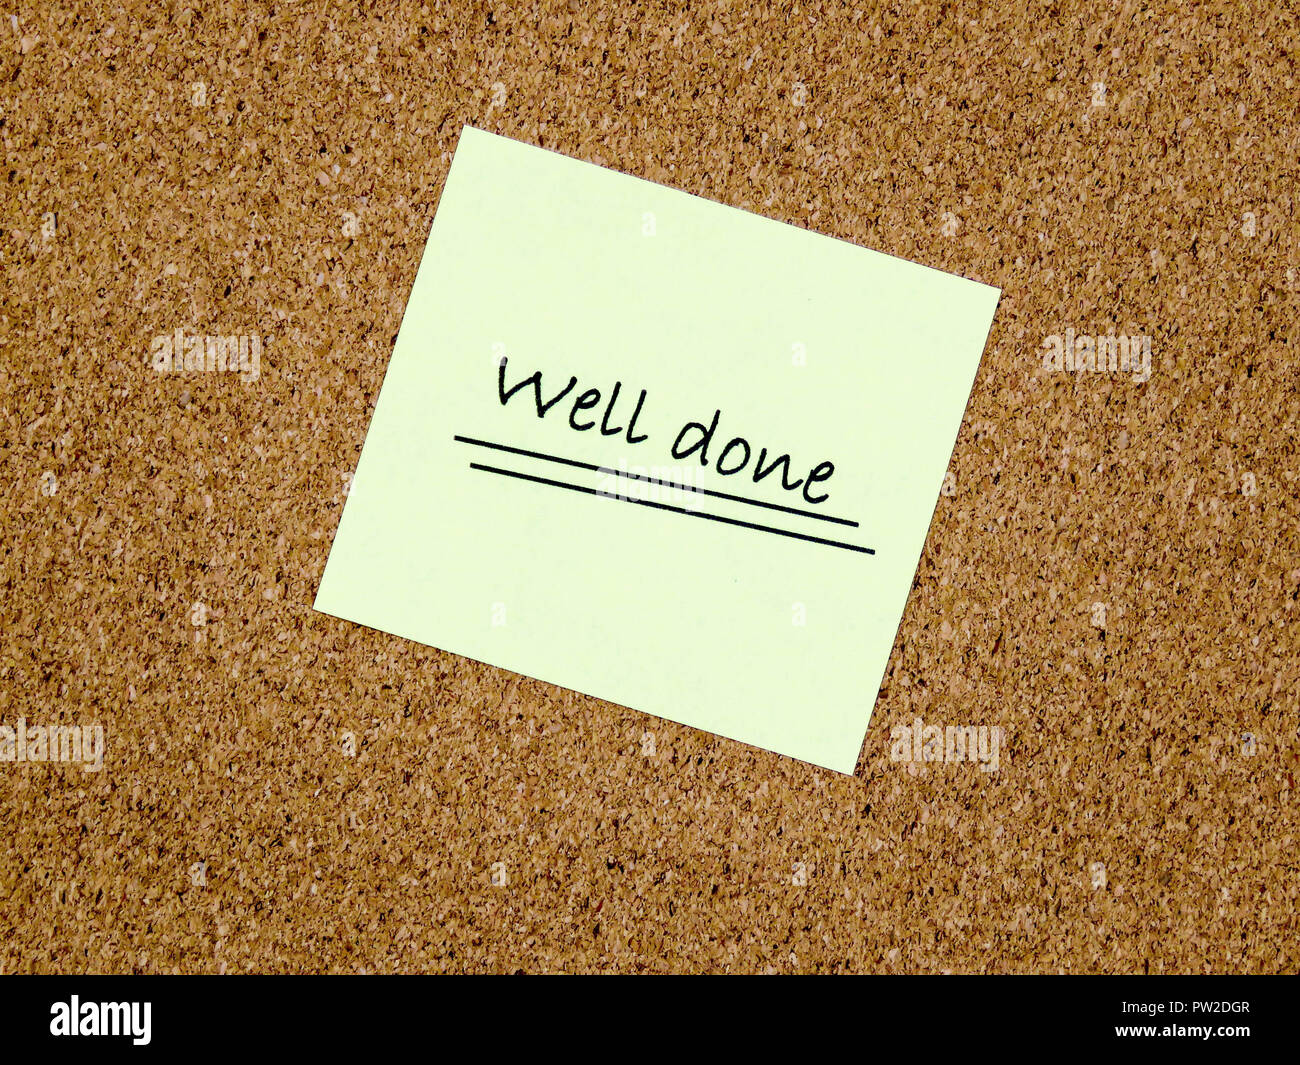 A yellow sticky note with well done written on it on a cork board background Stock Photo